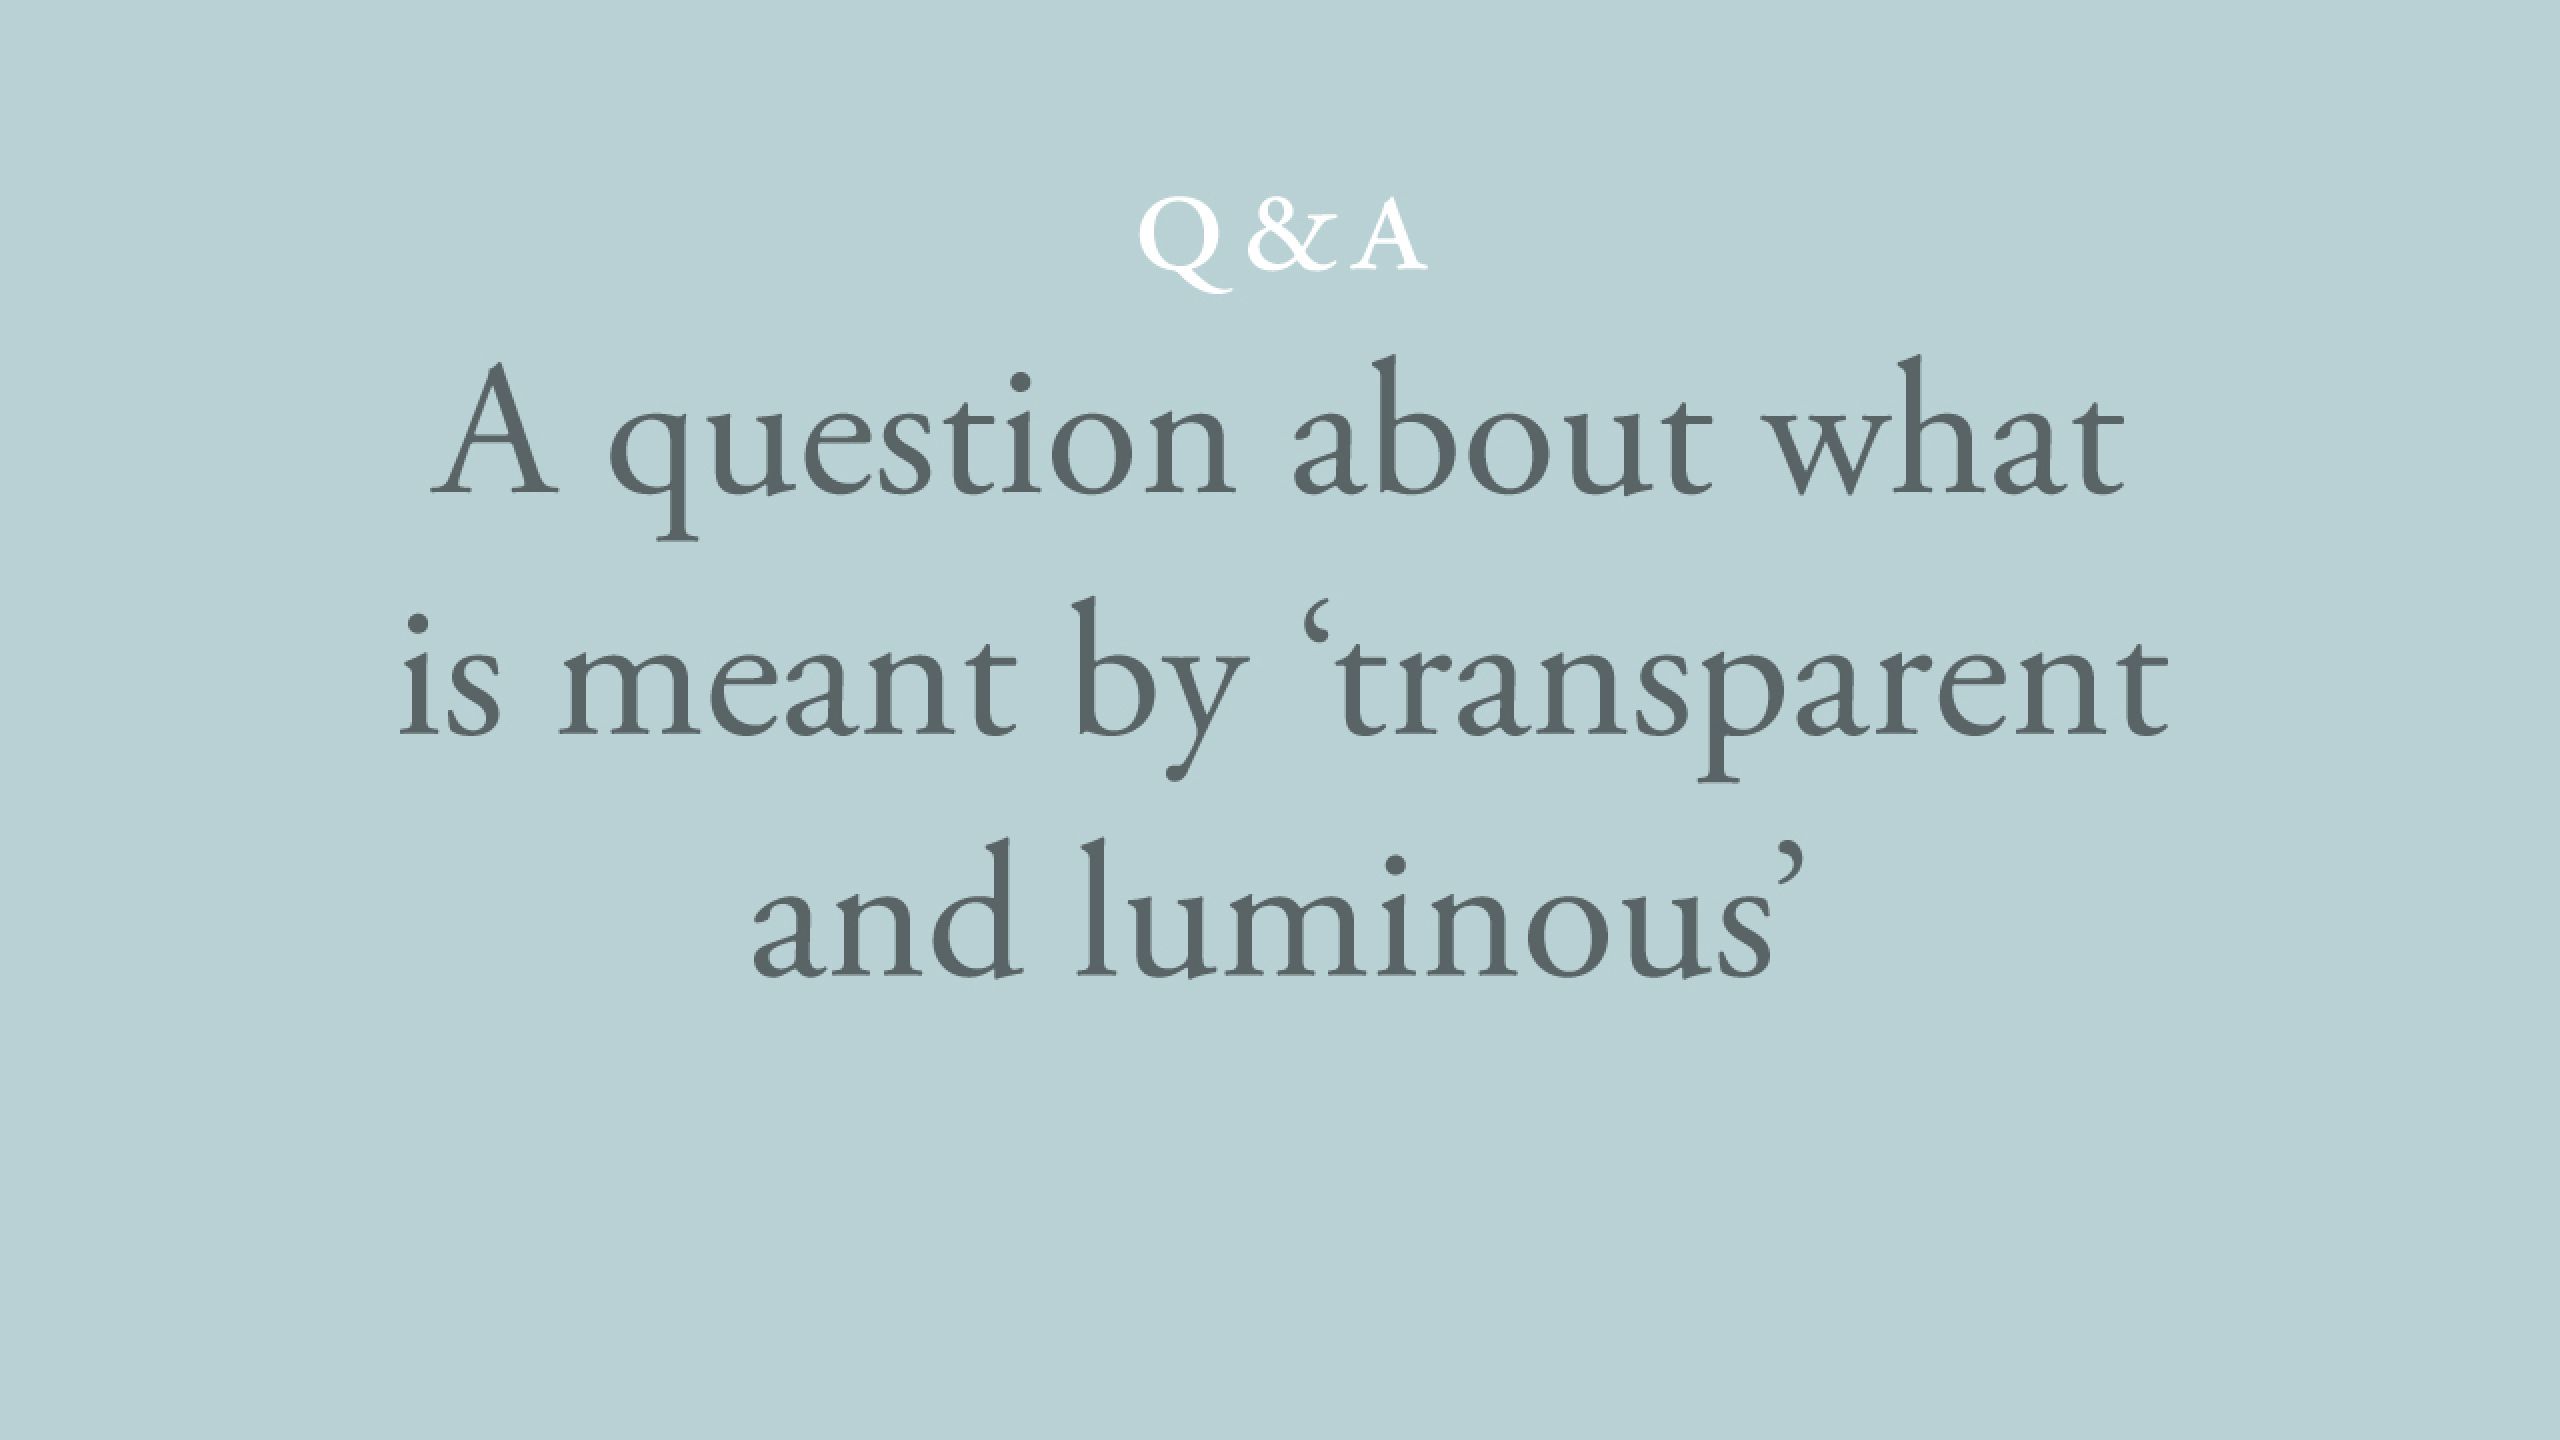 What is meant by 'transparent and luminous'?